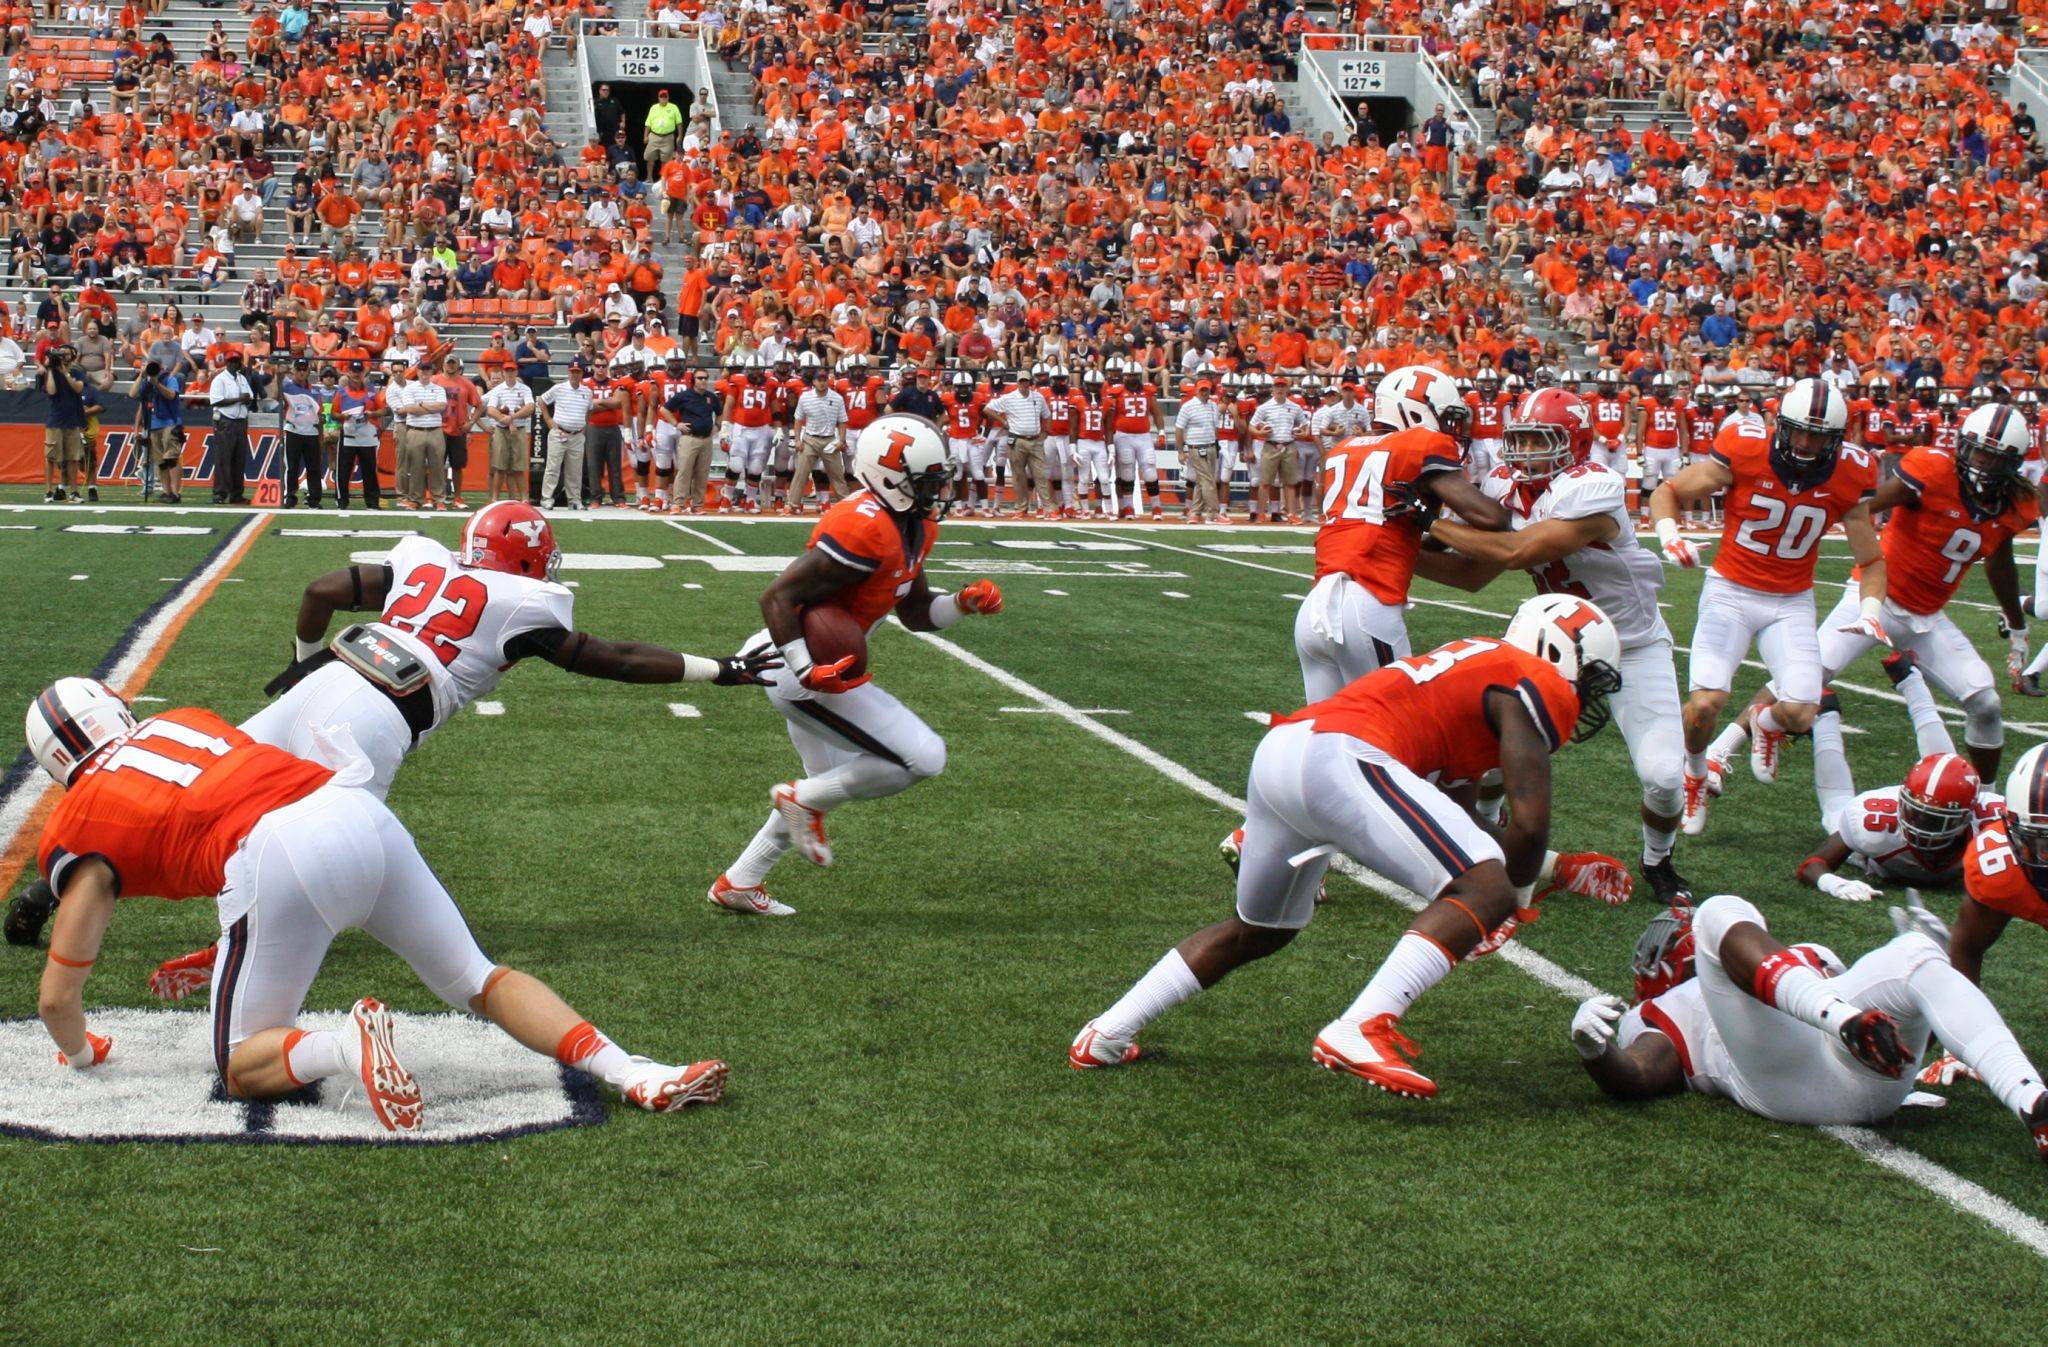 Not as advertised: Lunt and Illini start the season weakly